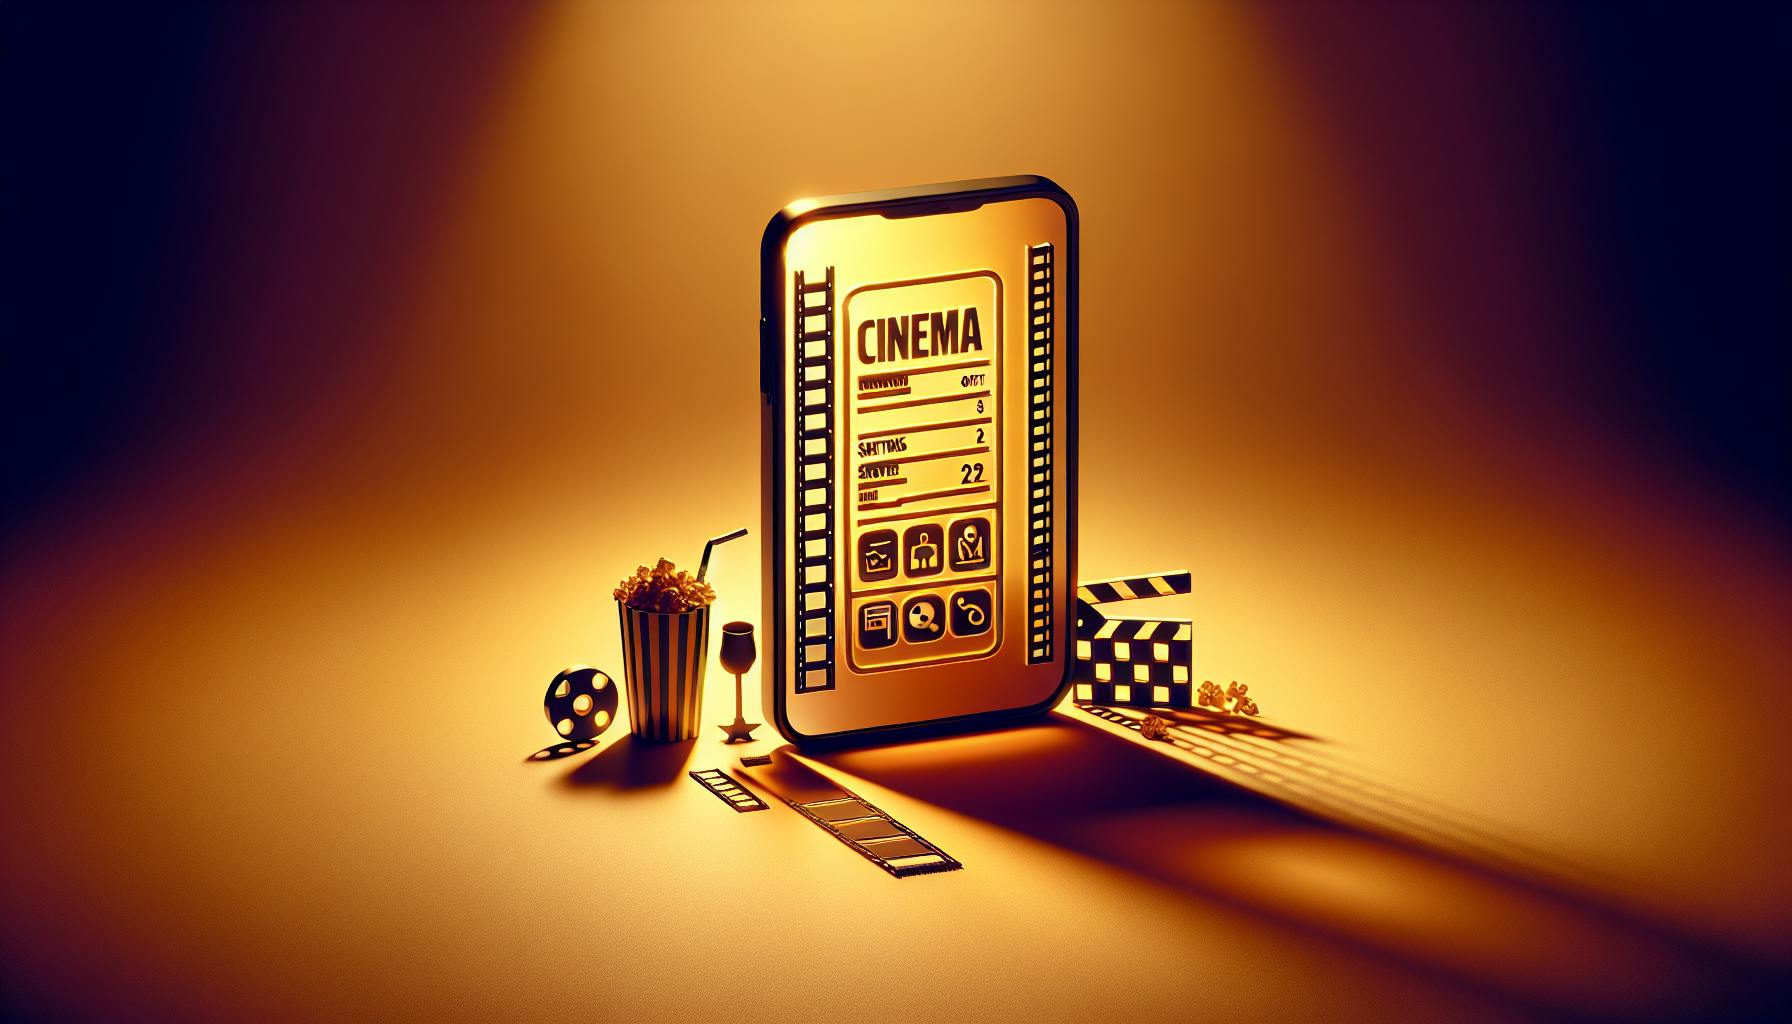 Boost Cinema Revenue with an Optimized Tickets App